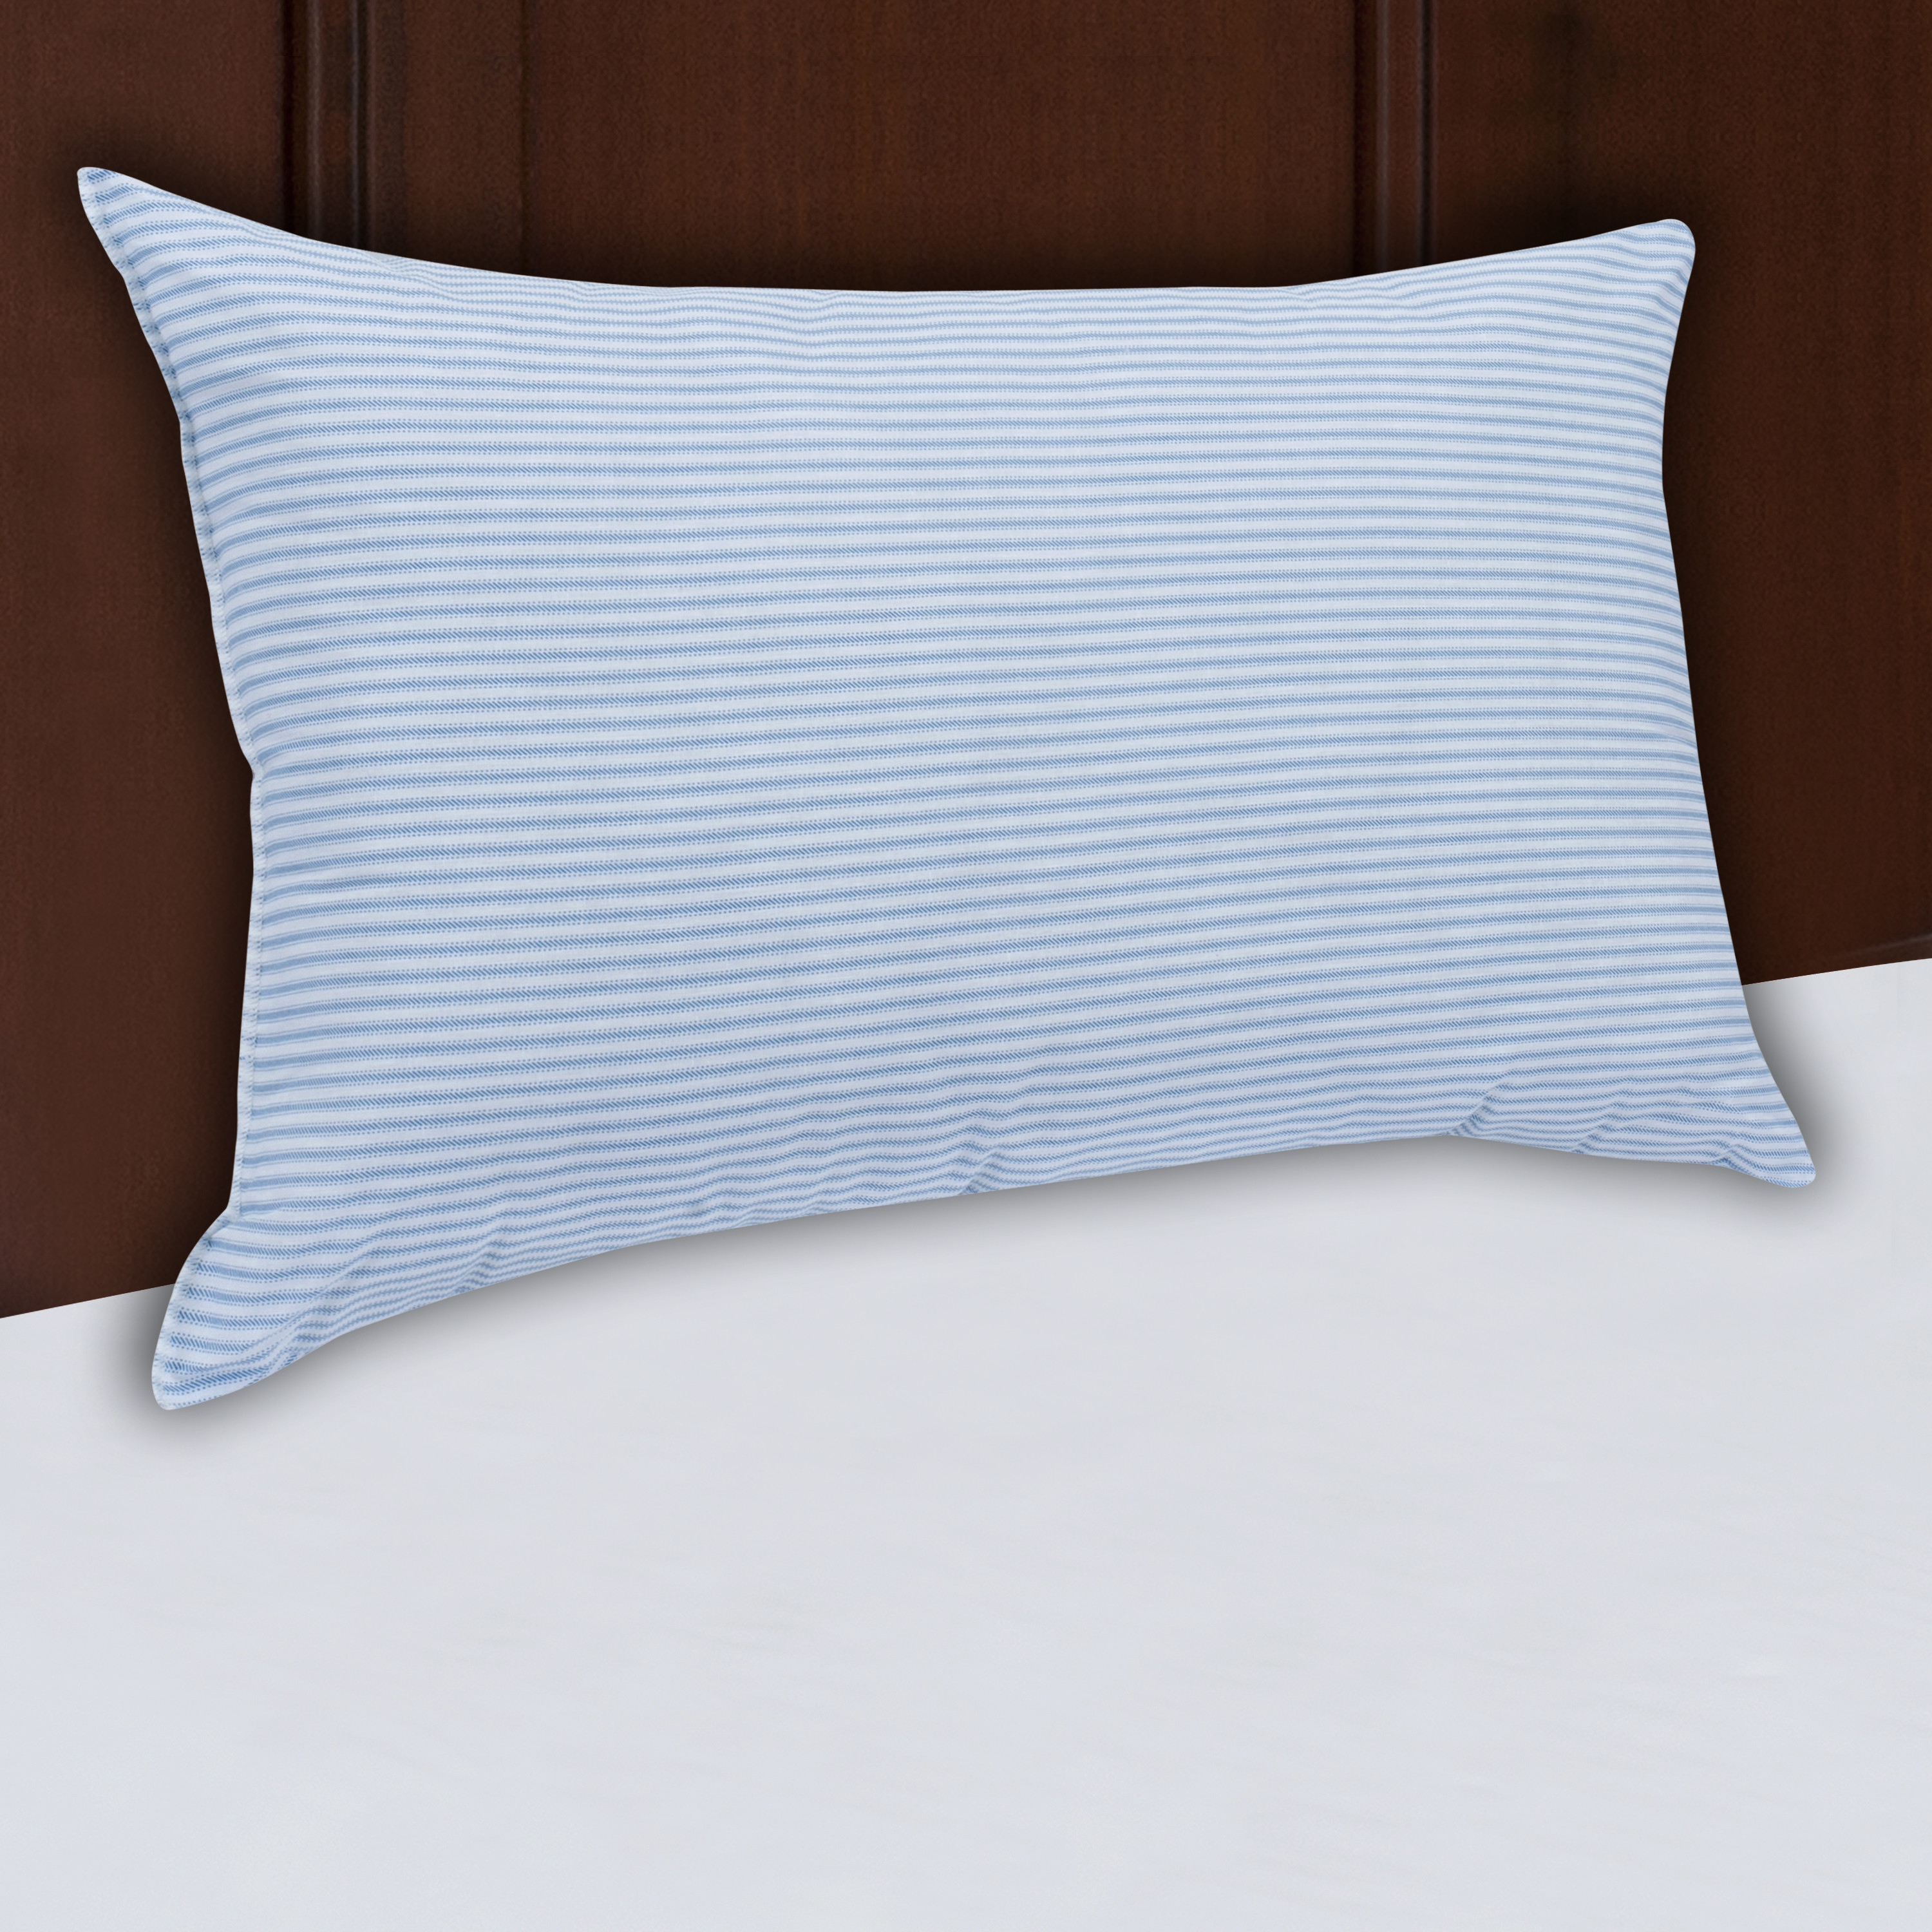 Mainstays HUGE Pillow 20" x 28" in Blue and White Stripe - image 4 of 8